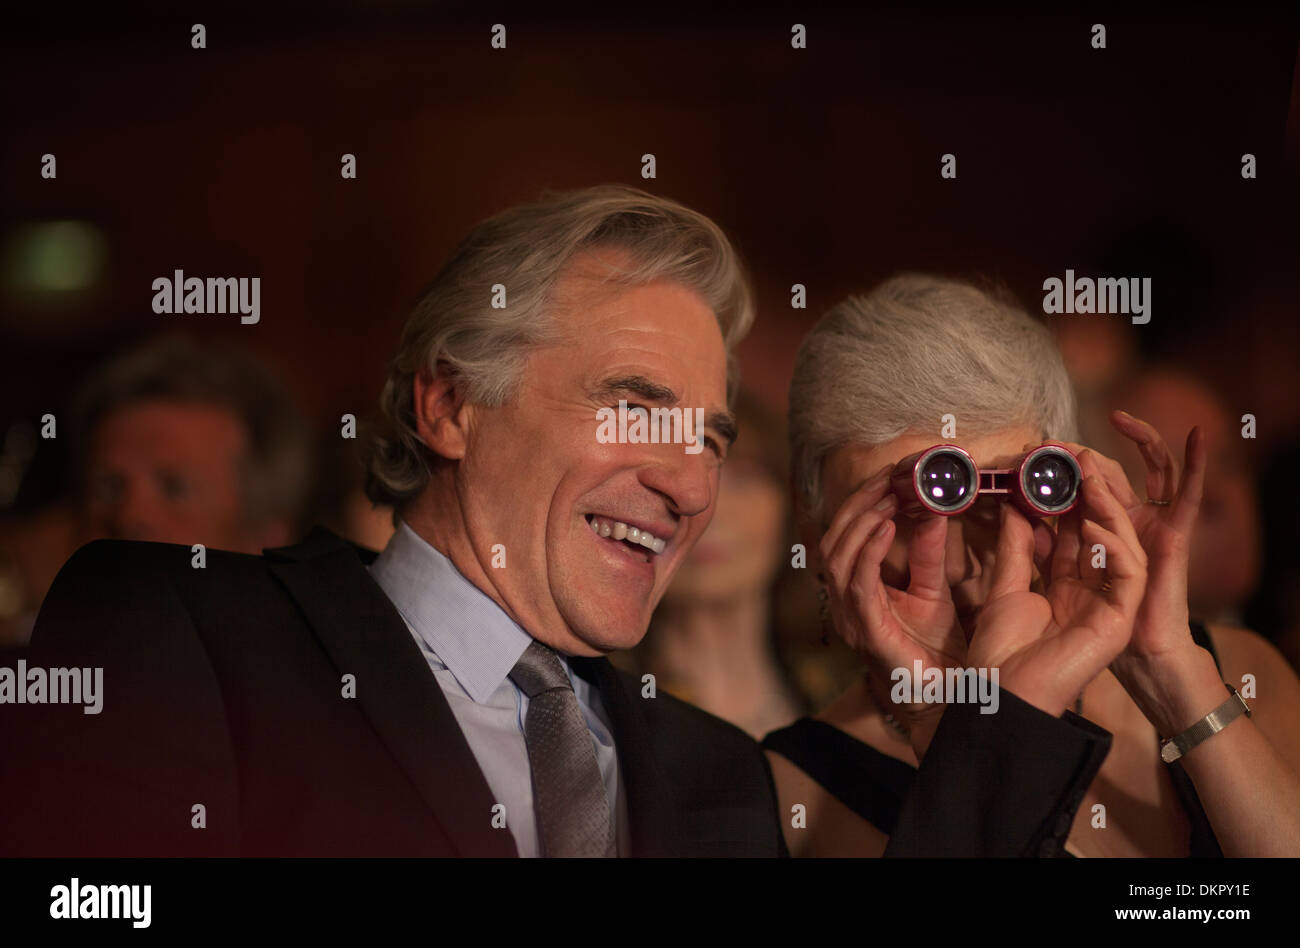 Close up of smiling couple using opera glasses in theater audience Stock Photo